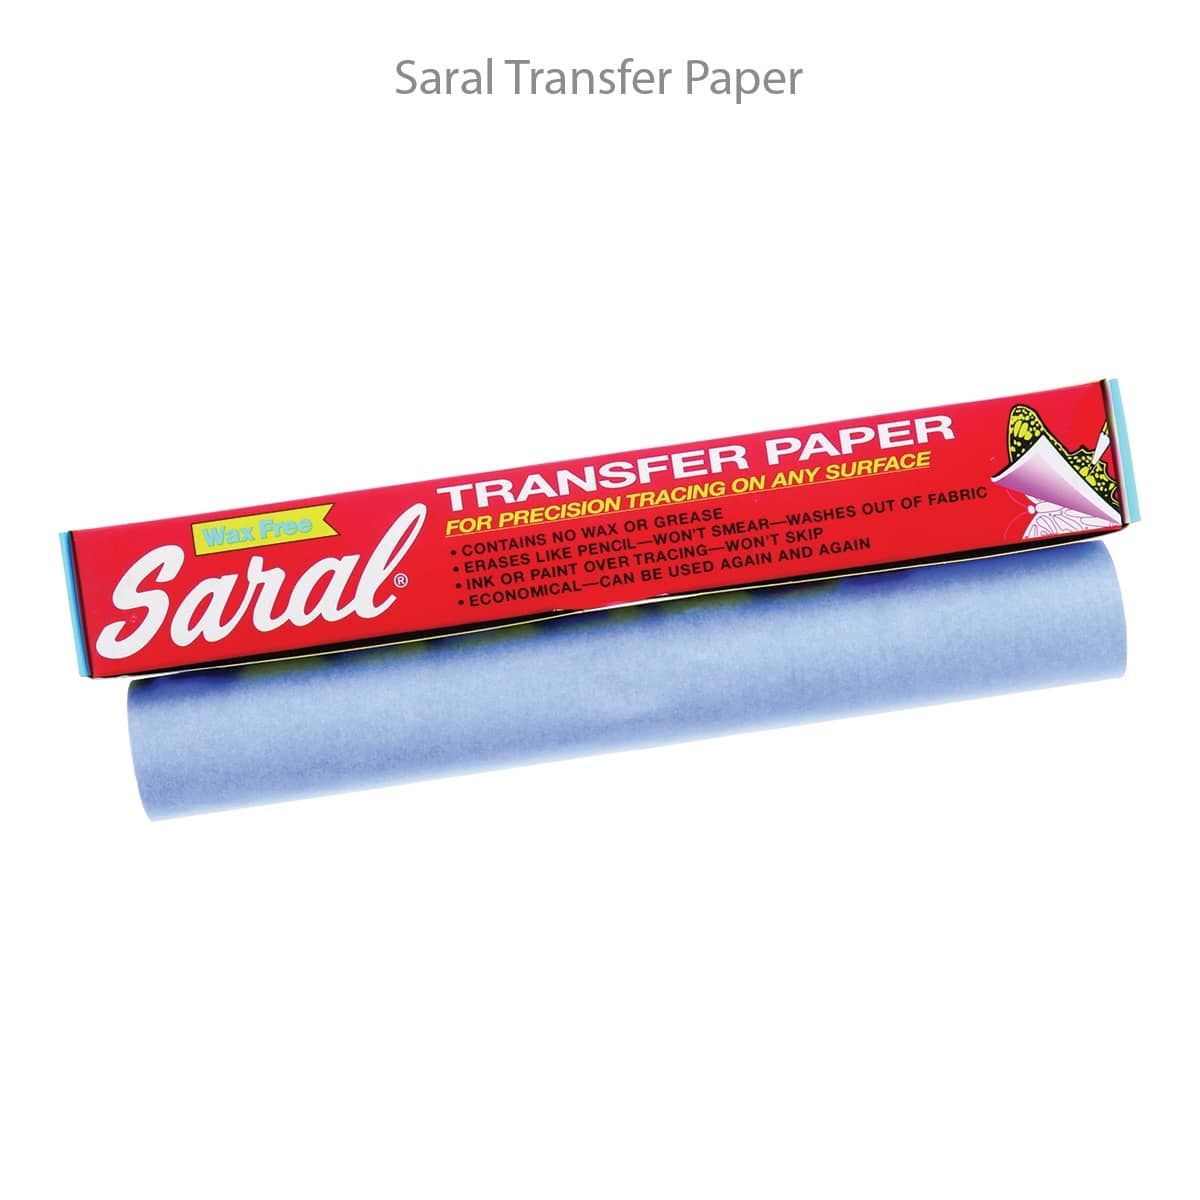 Saral Transfer Paper, Graphite Color, Crafting Supply, Makes Clean Tracing  Lines, Nice Supply for Crafting, Scrapbooking, Greeting Cards 